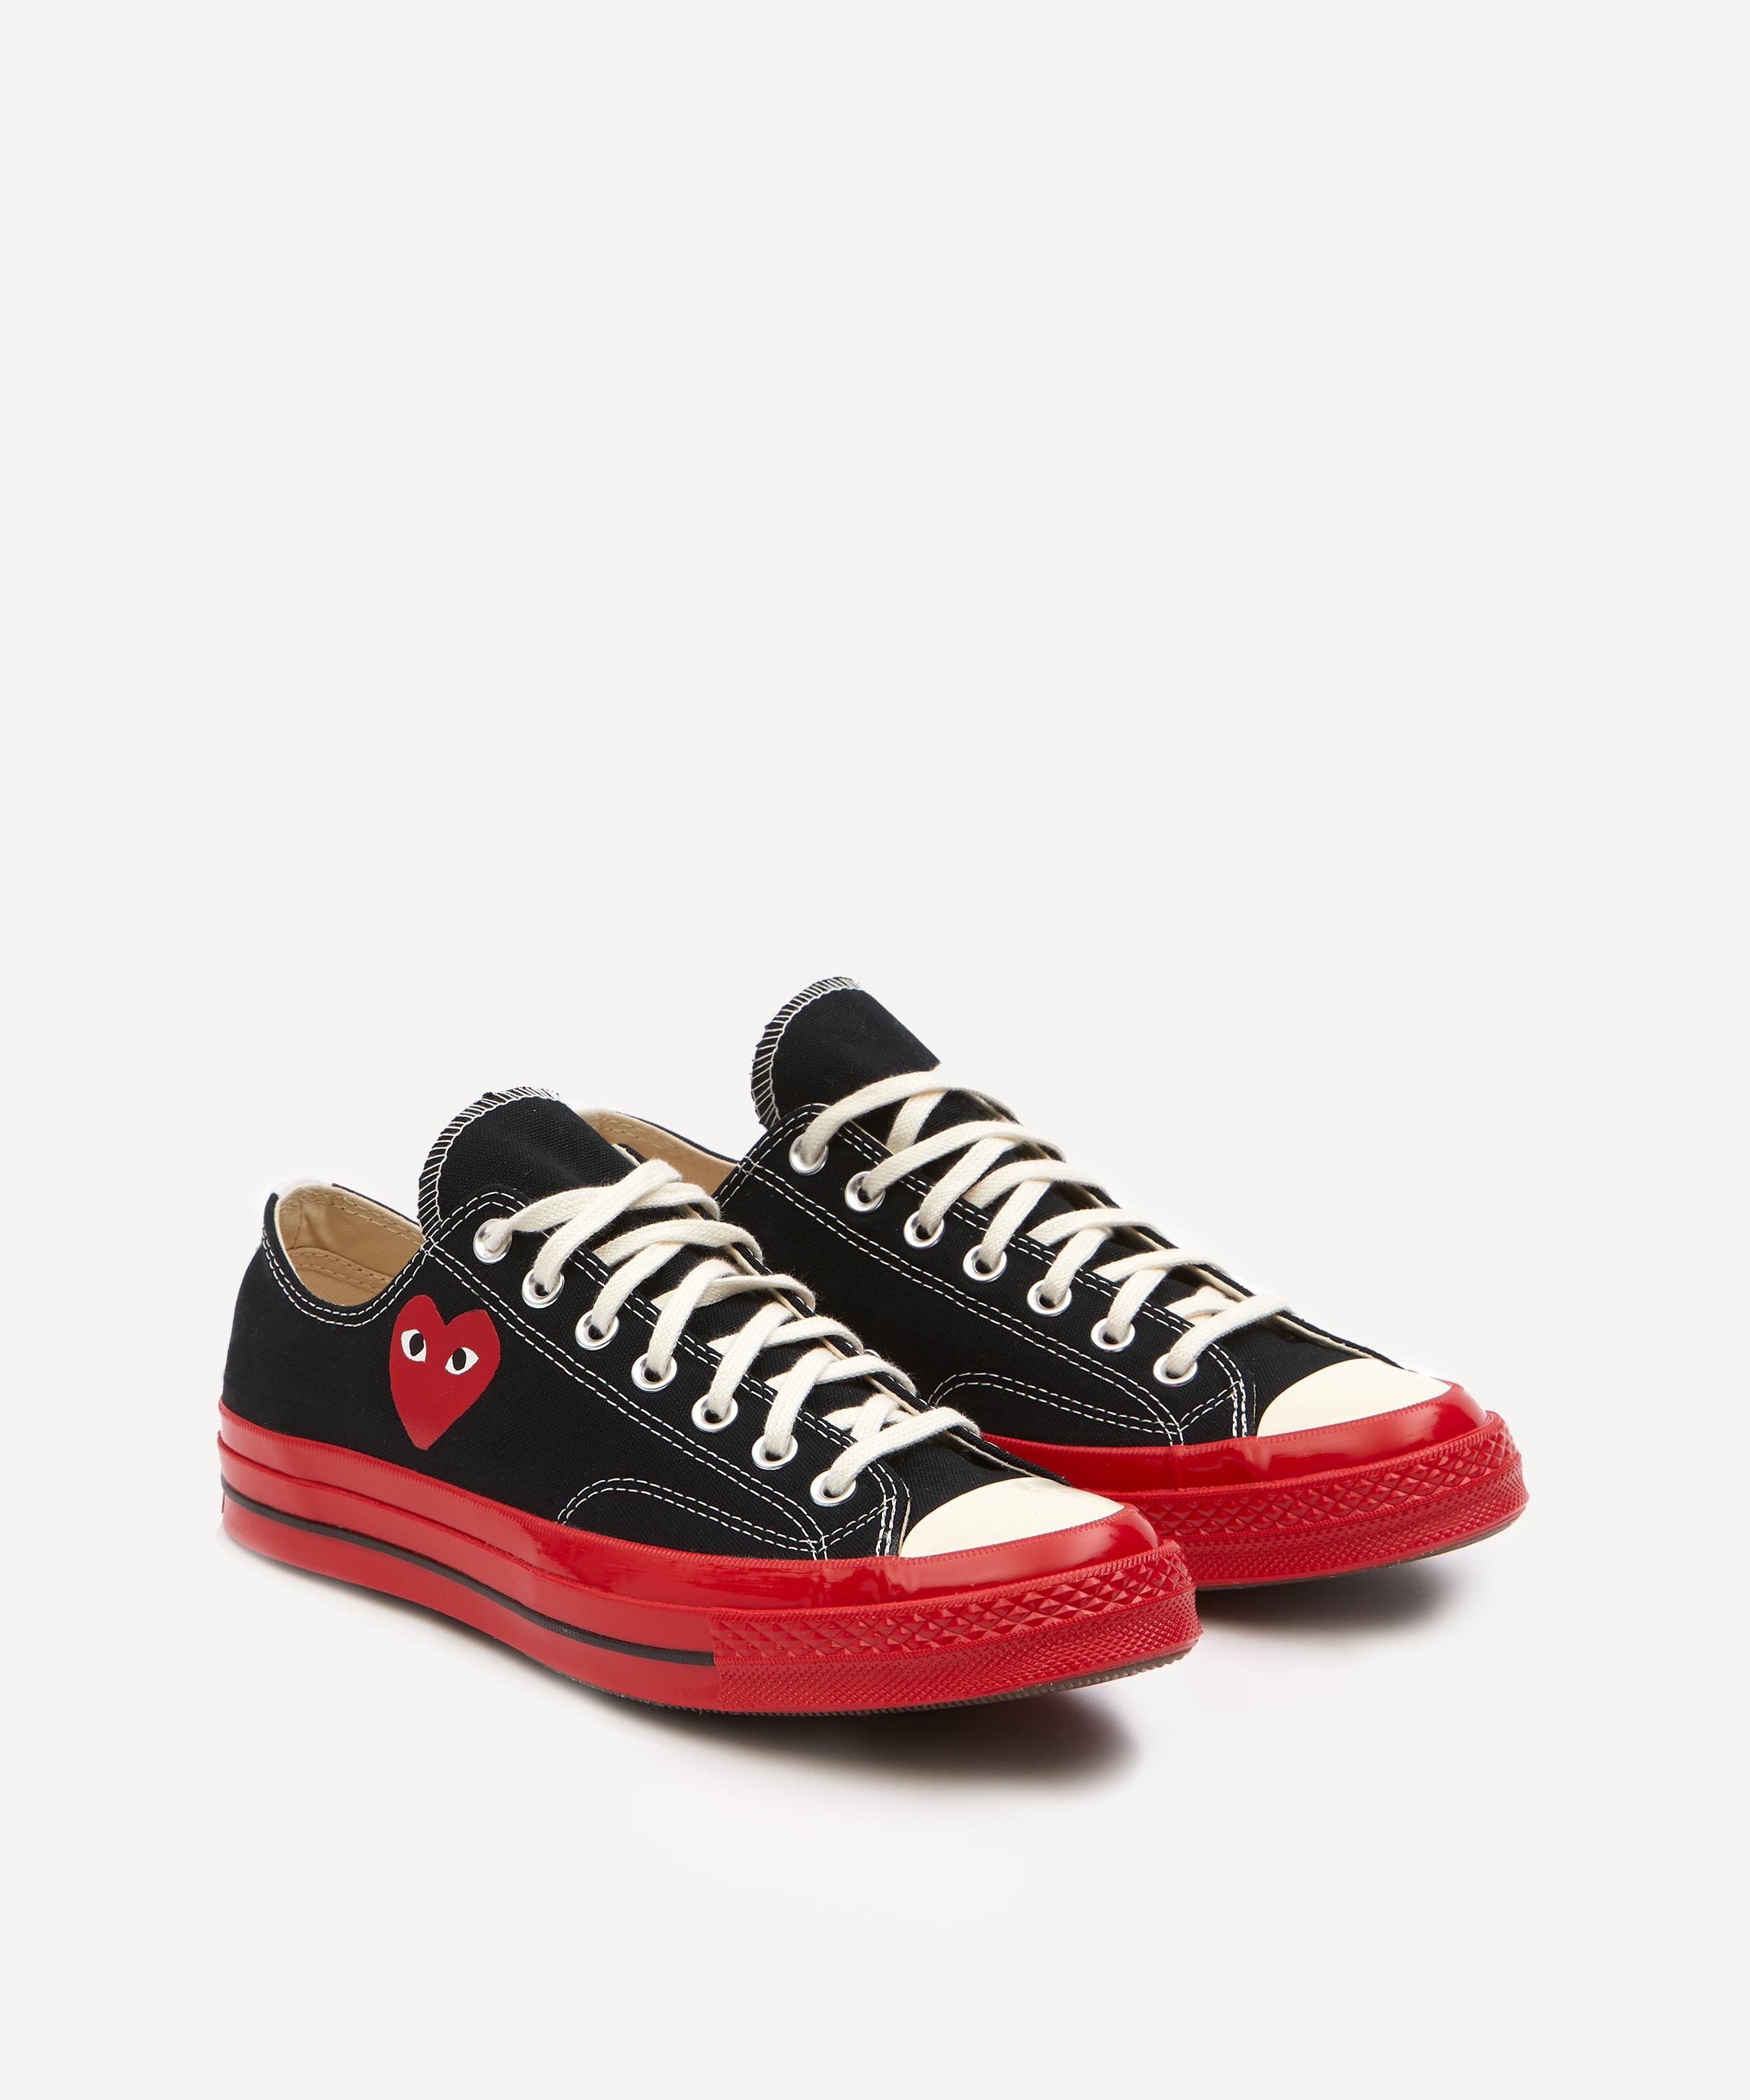 x Converse 70s Canvas Low-Top Red Sole Trainers - 1